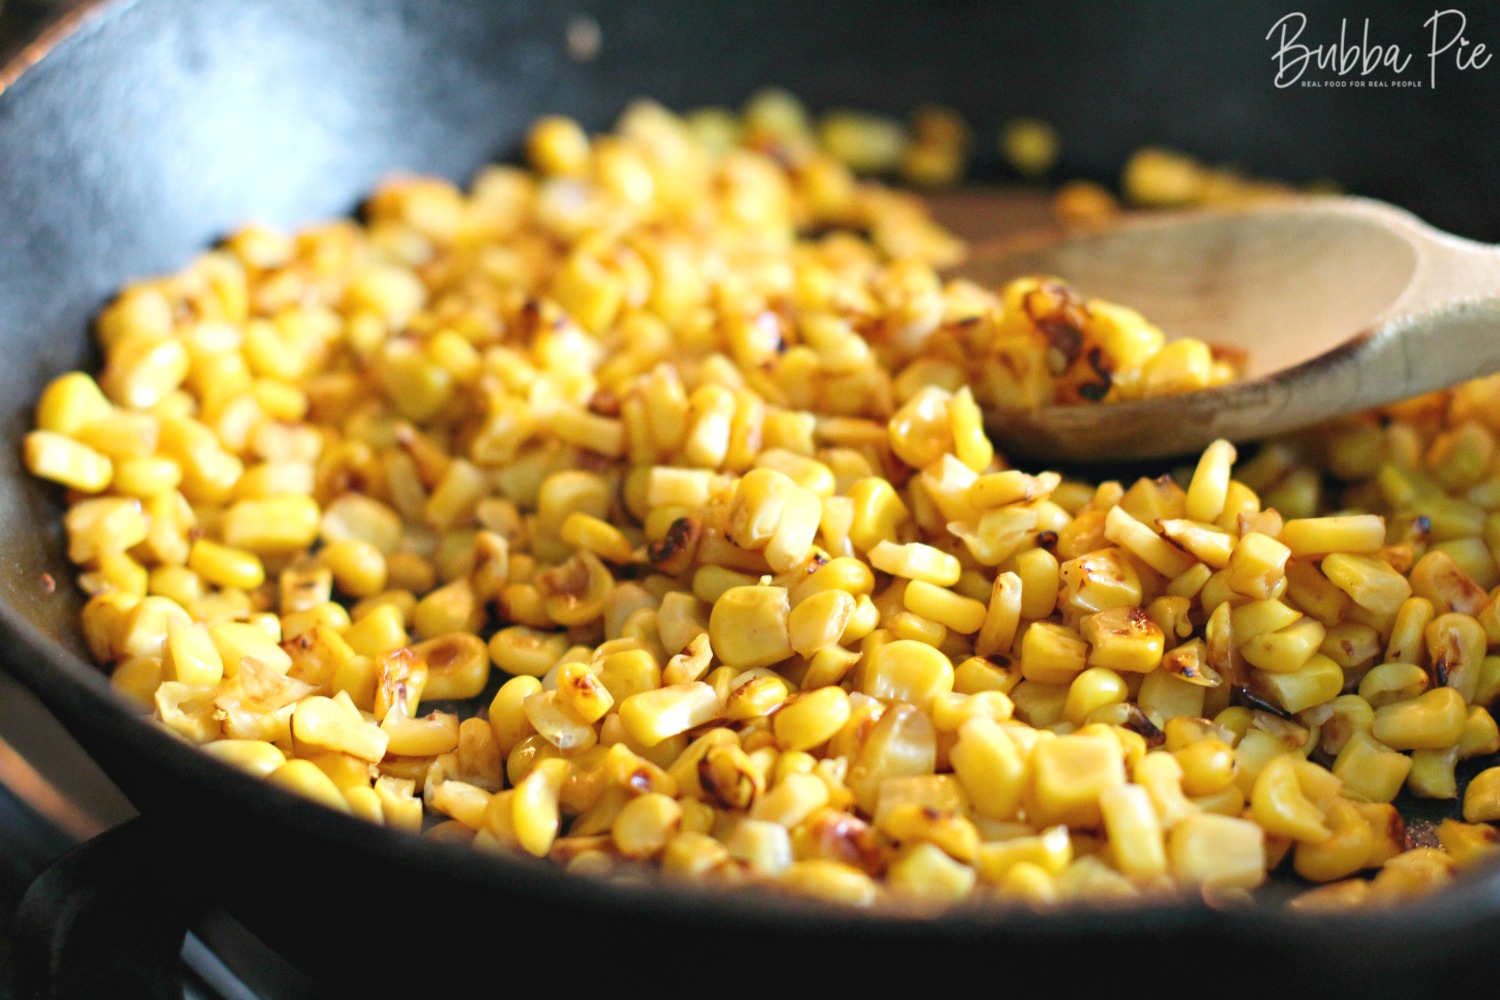 mexican corn salad is made with roasted corn or elote